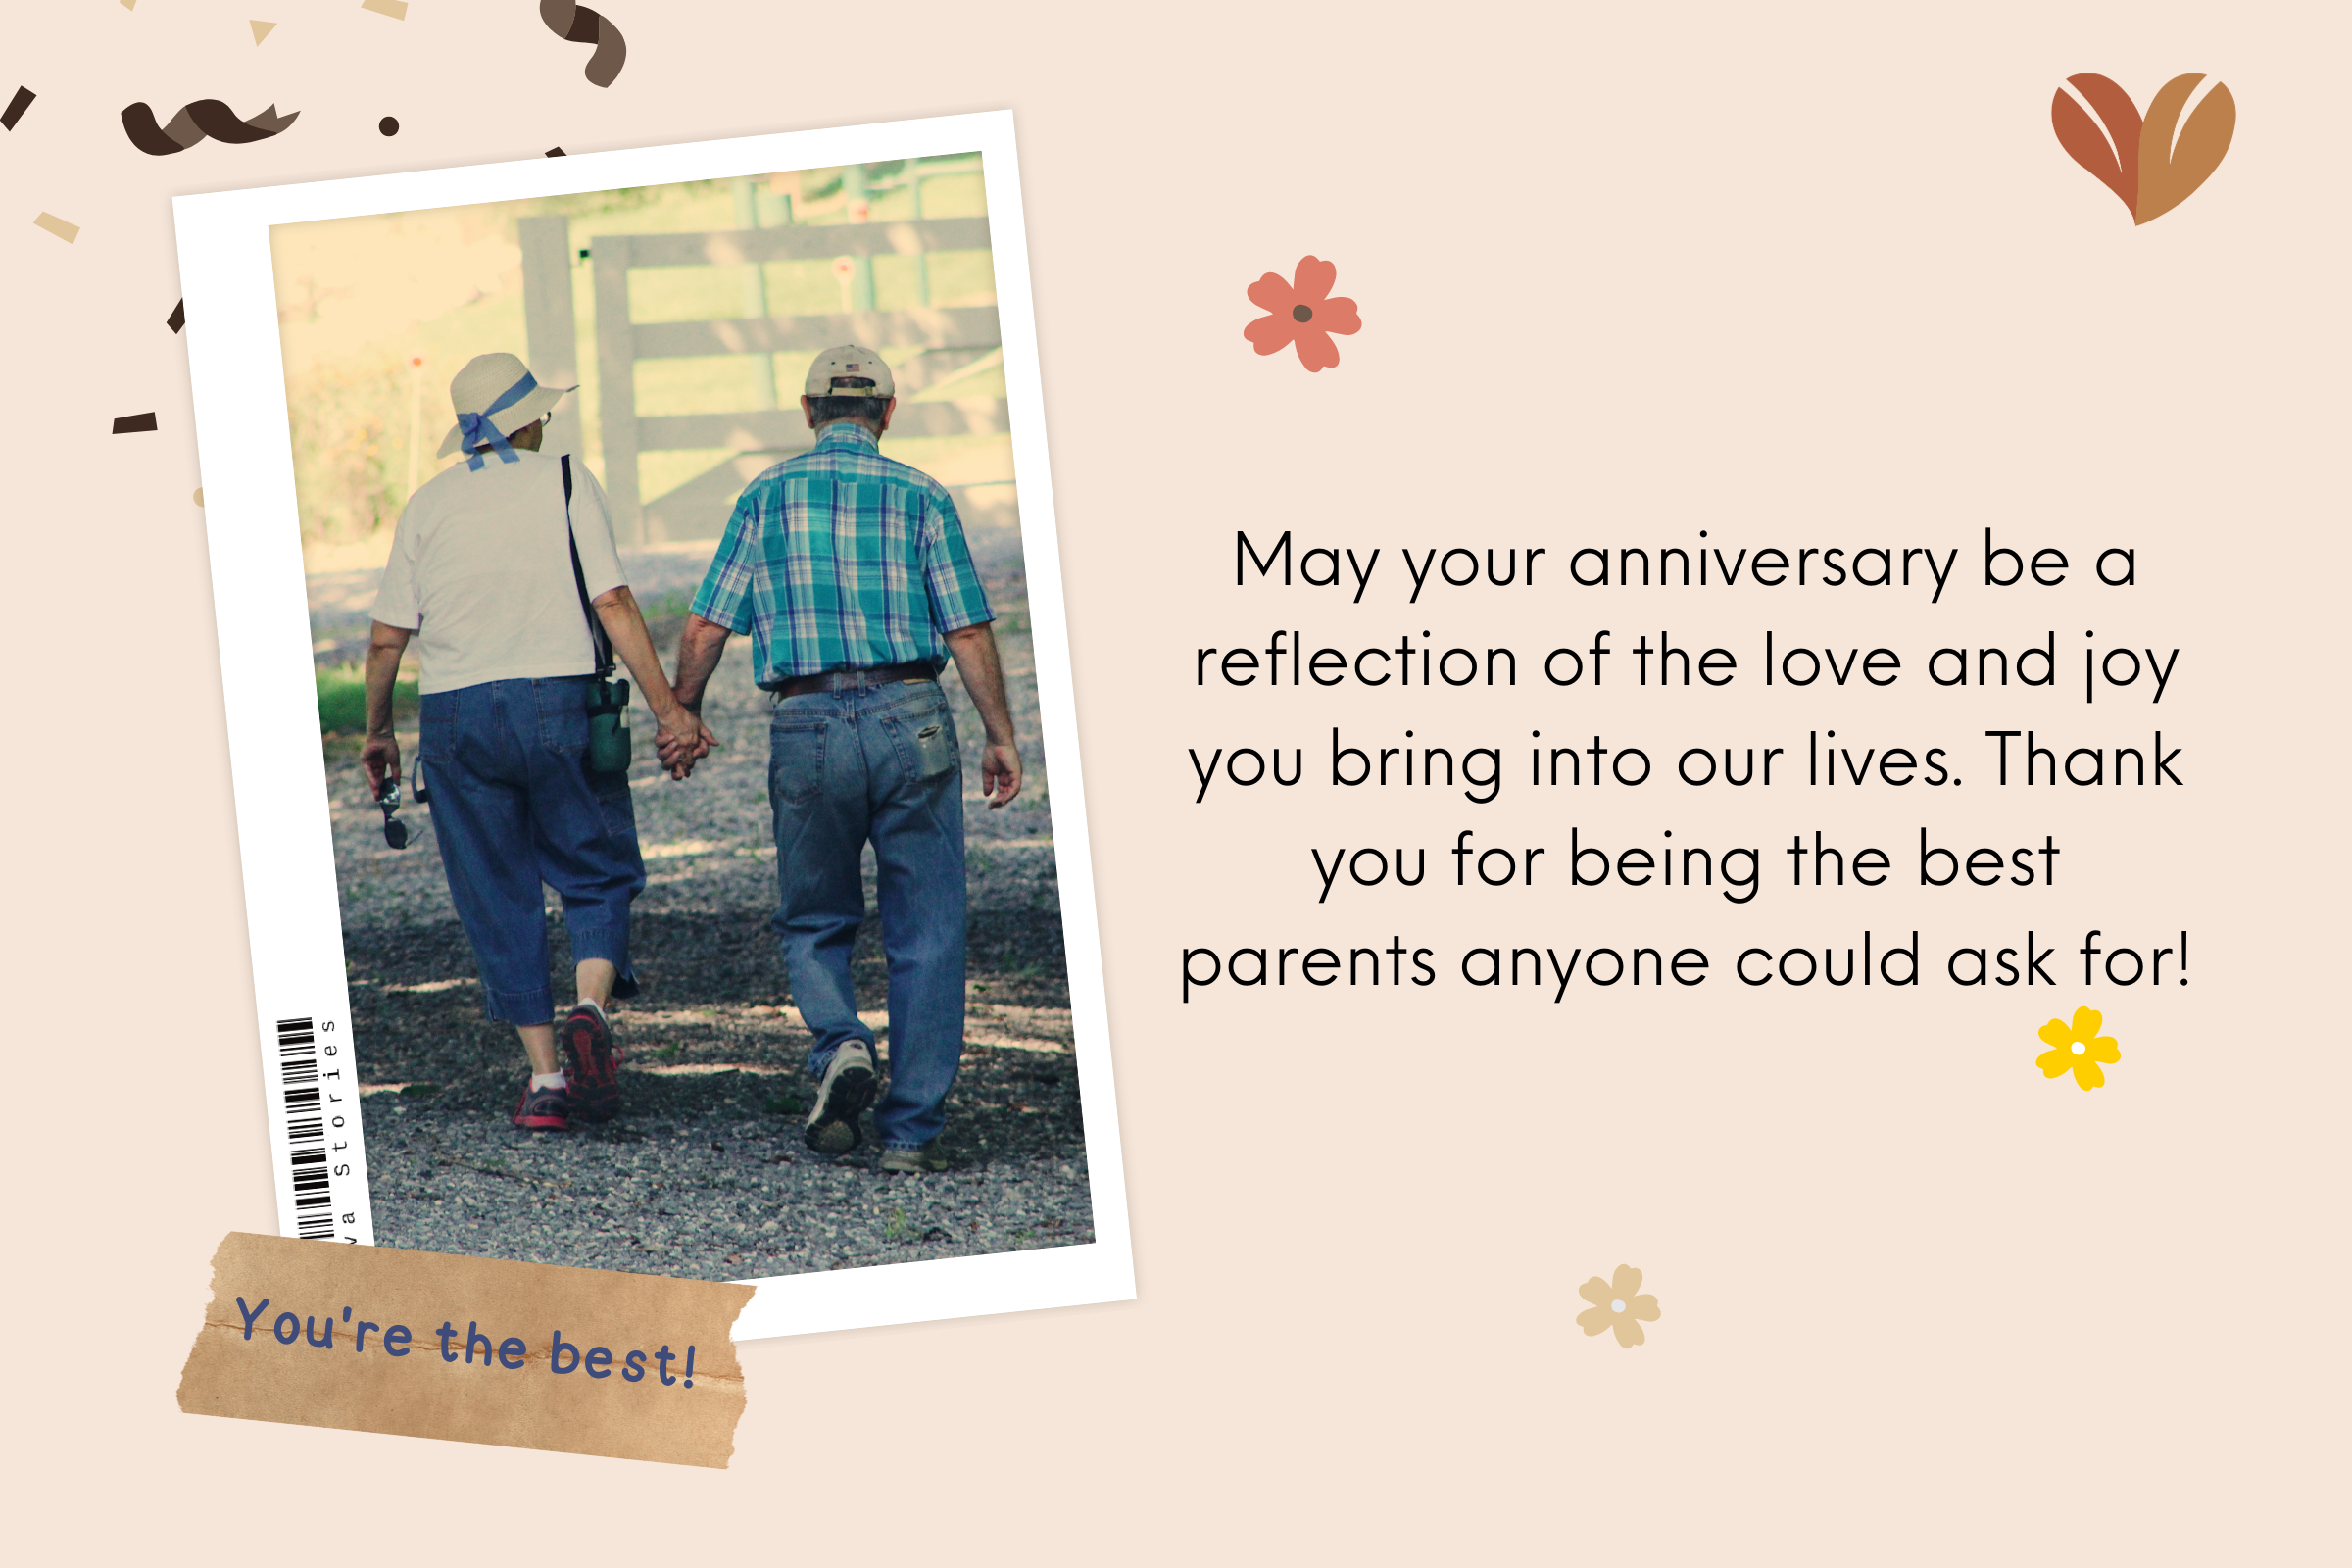 Sending the happy anniversary parents wishes to make our nurturers happy: Happy Anniversary Parents Quotes